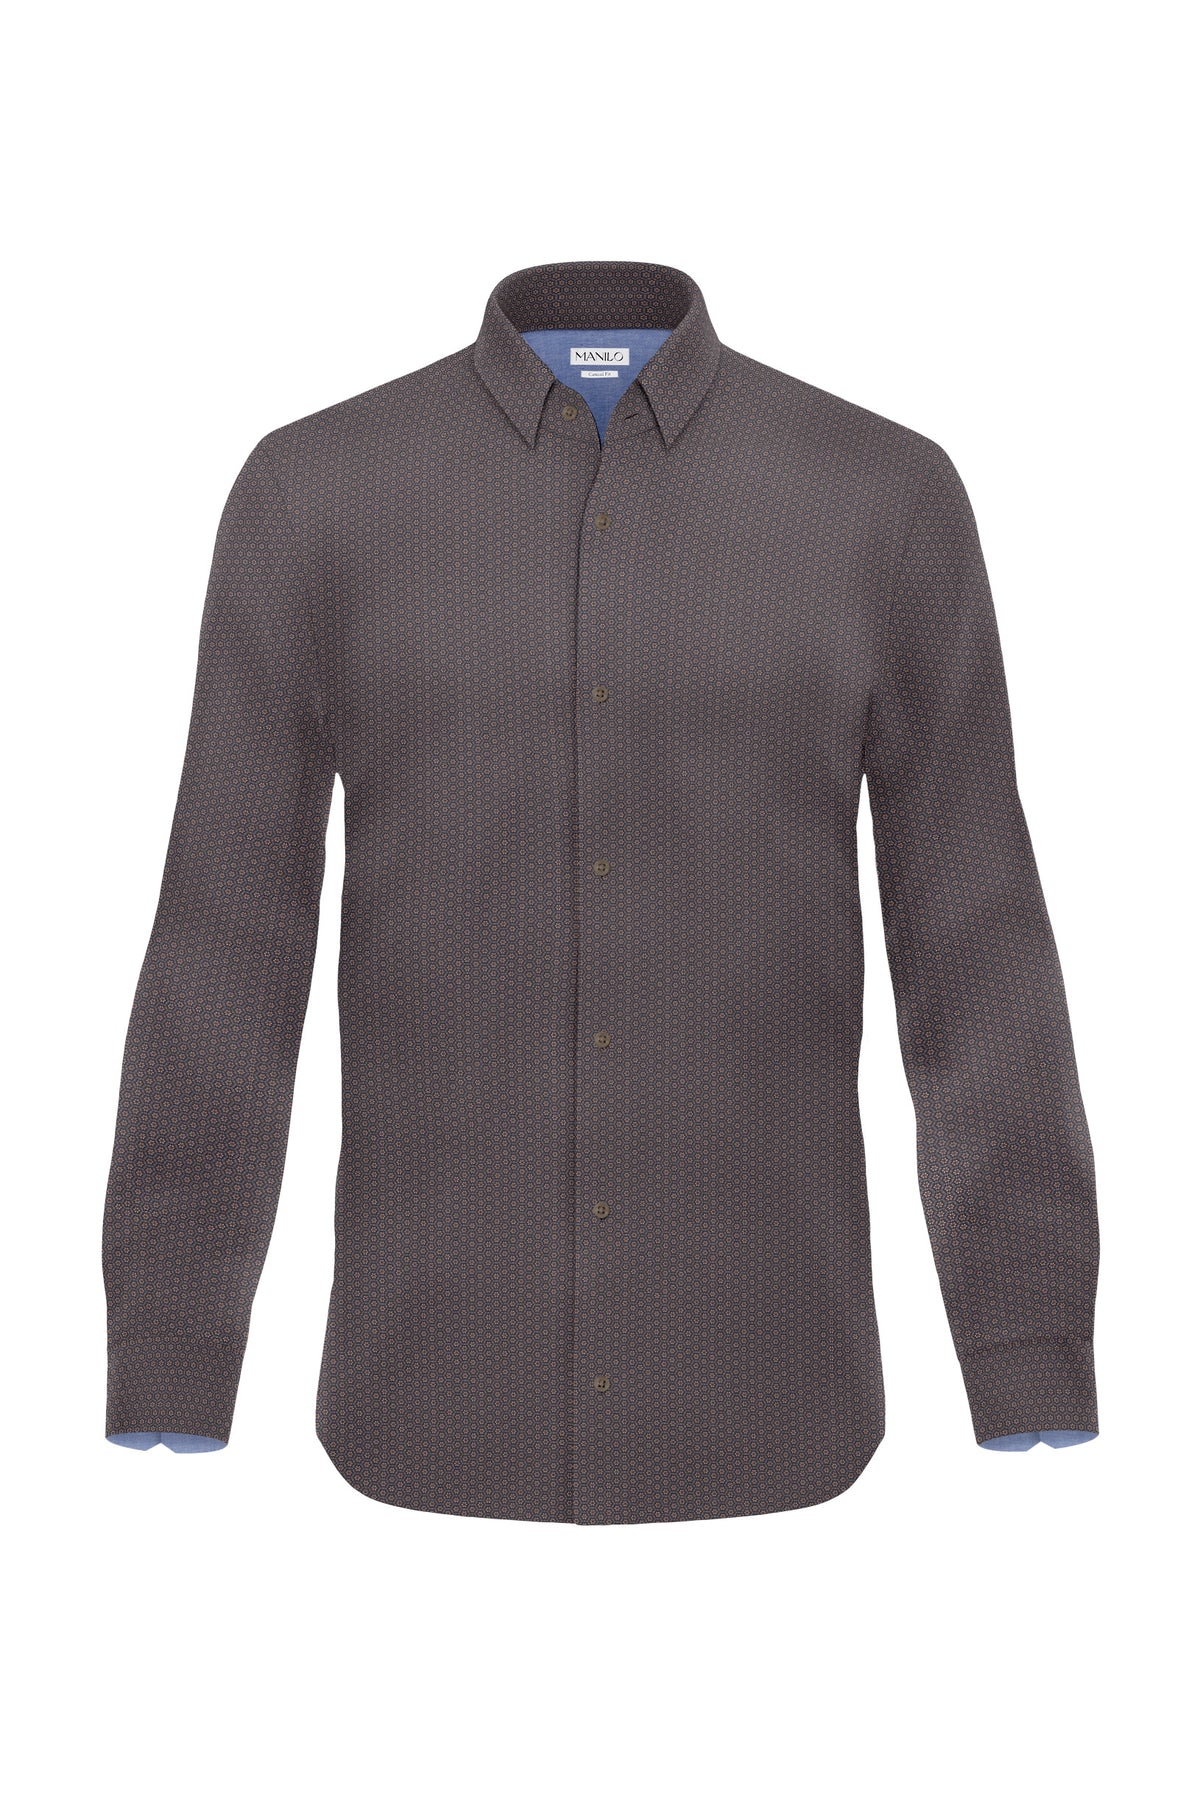 Casual shirt with graphic pattern in brown/beige (Art. 2237-C)